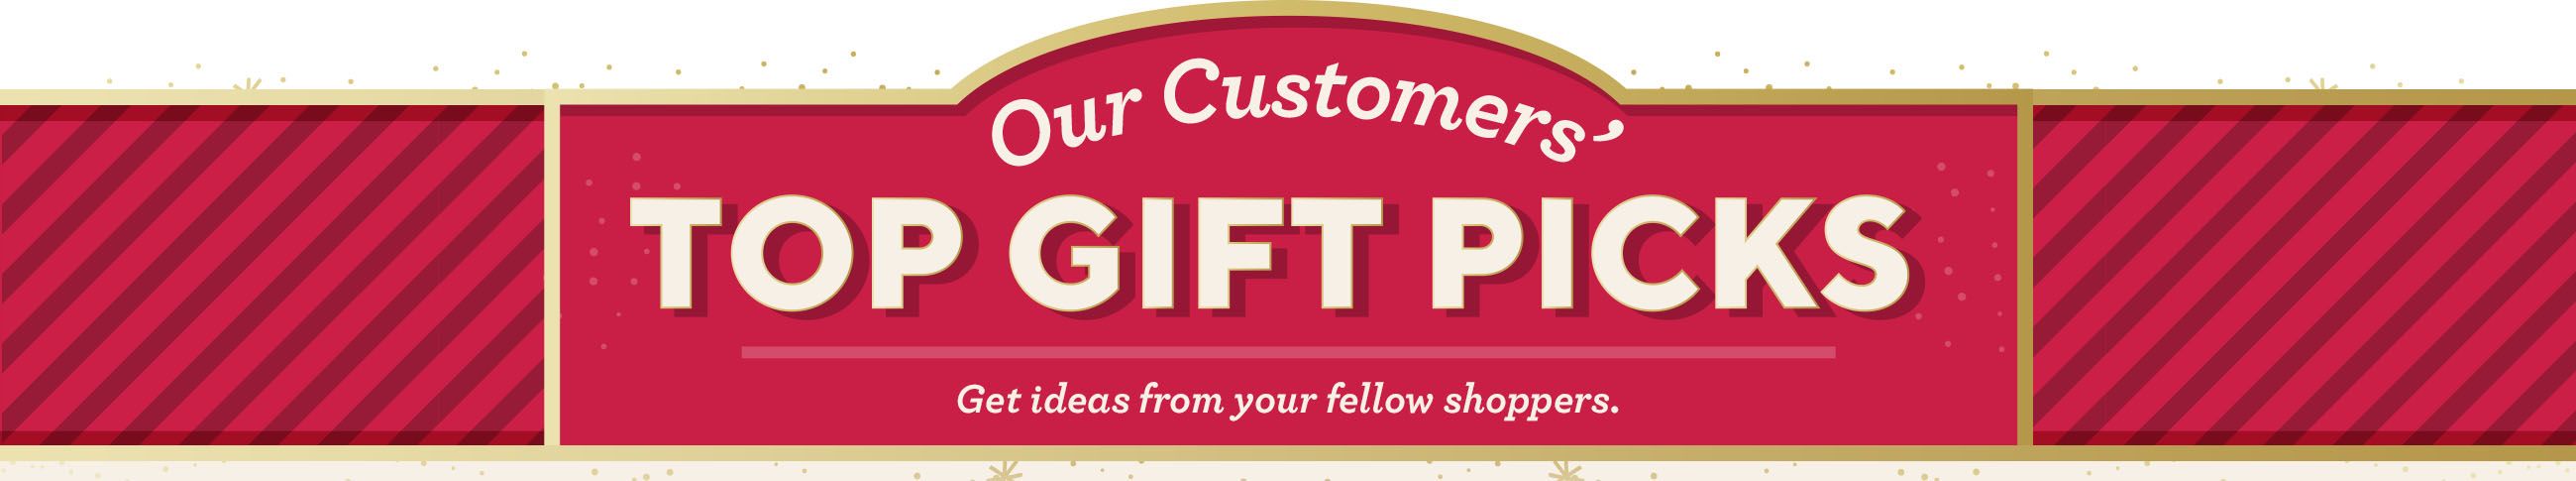 Our Customers' Top Gift Picks - Get ideas from your fellow shoppers.